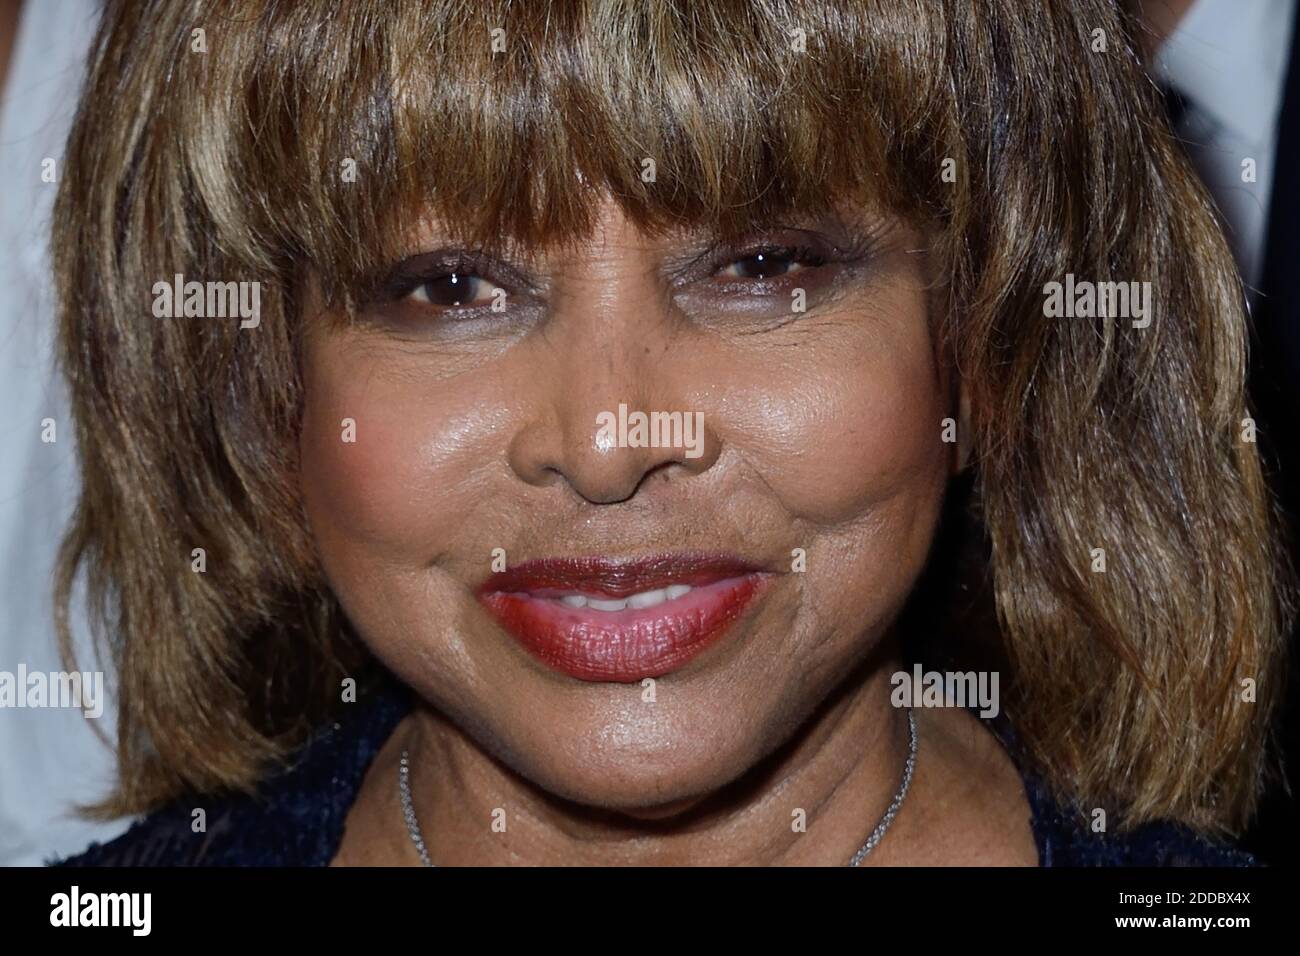 Tina Turner attended the Giorgio Armani Prive Haute Couture Fall/Winter  2018-2019 show in Paris, France on Tuesday July 3, 2018, hours before her  son was found dead from suicide. The 78-year-old singer's